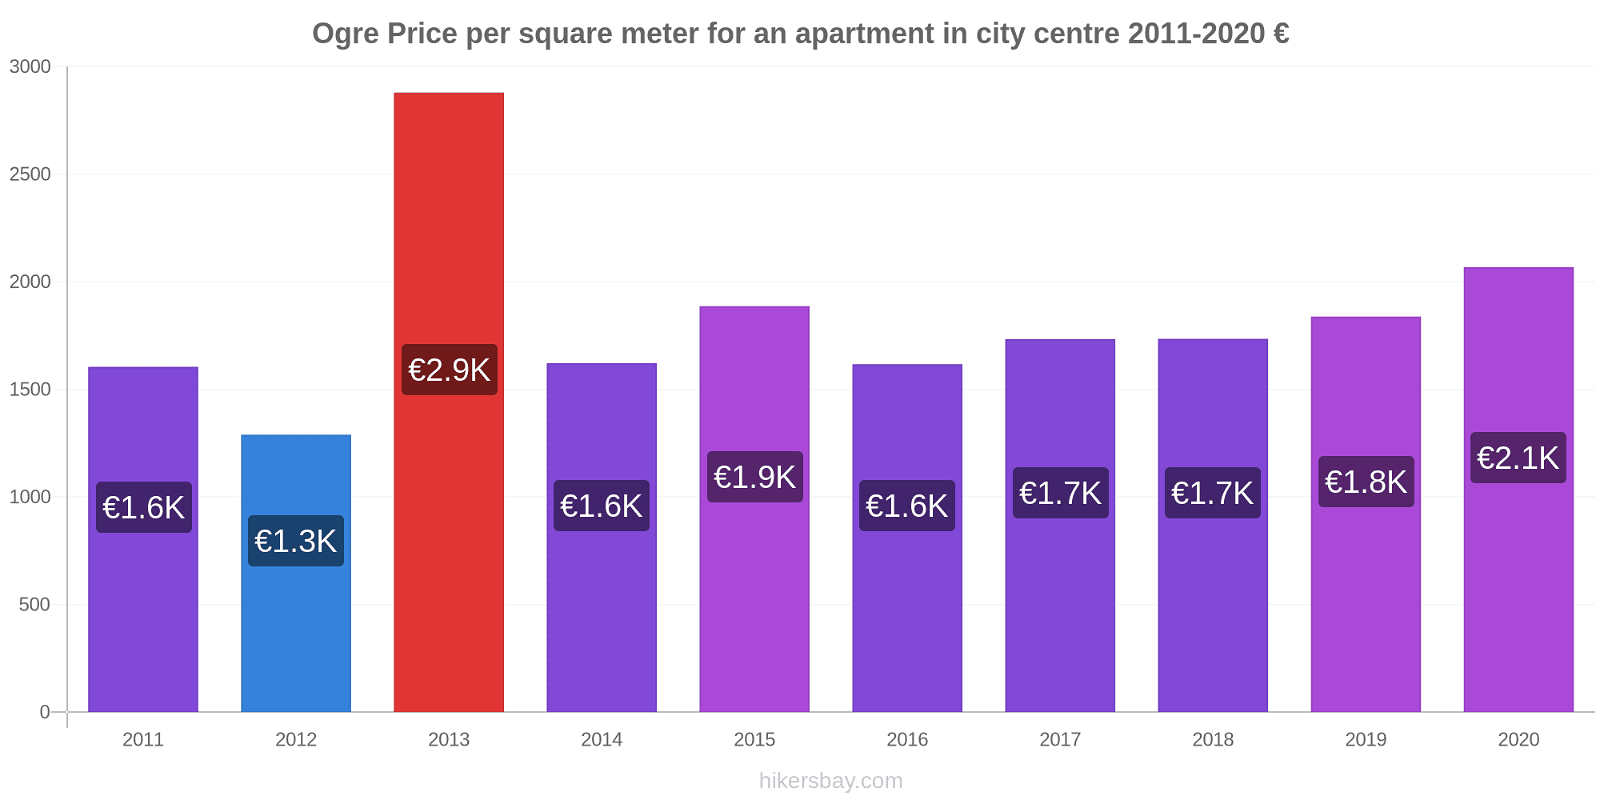 Ogre price changes Price per square meter for an apartment in city centre hikersbay.com